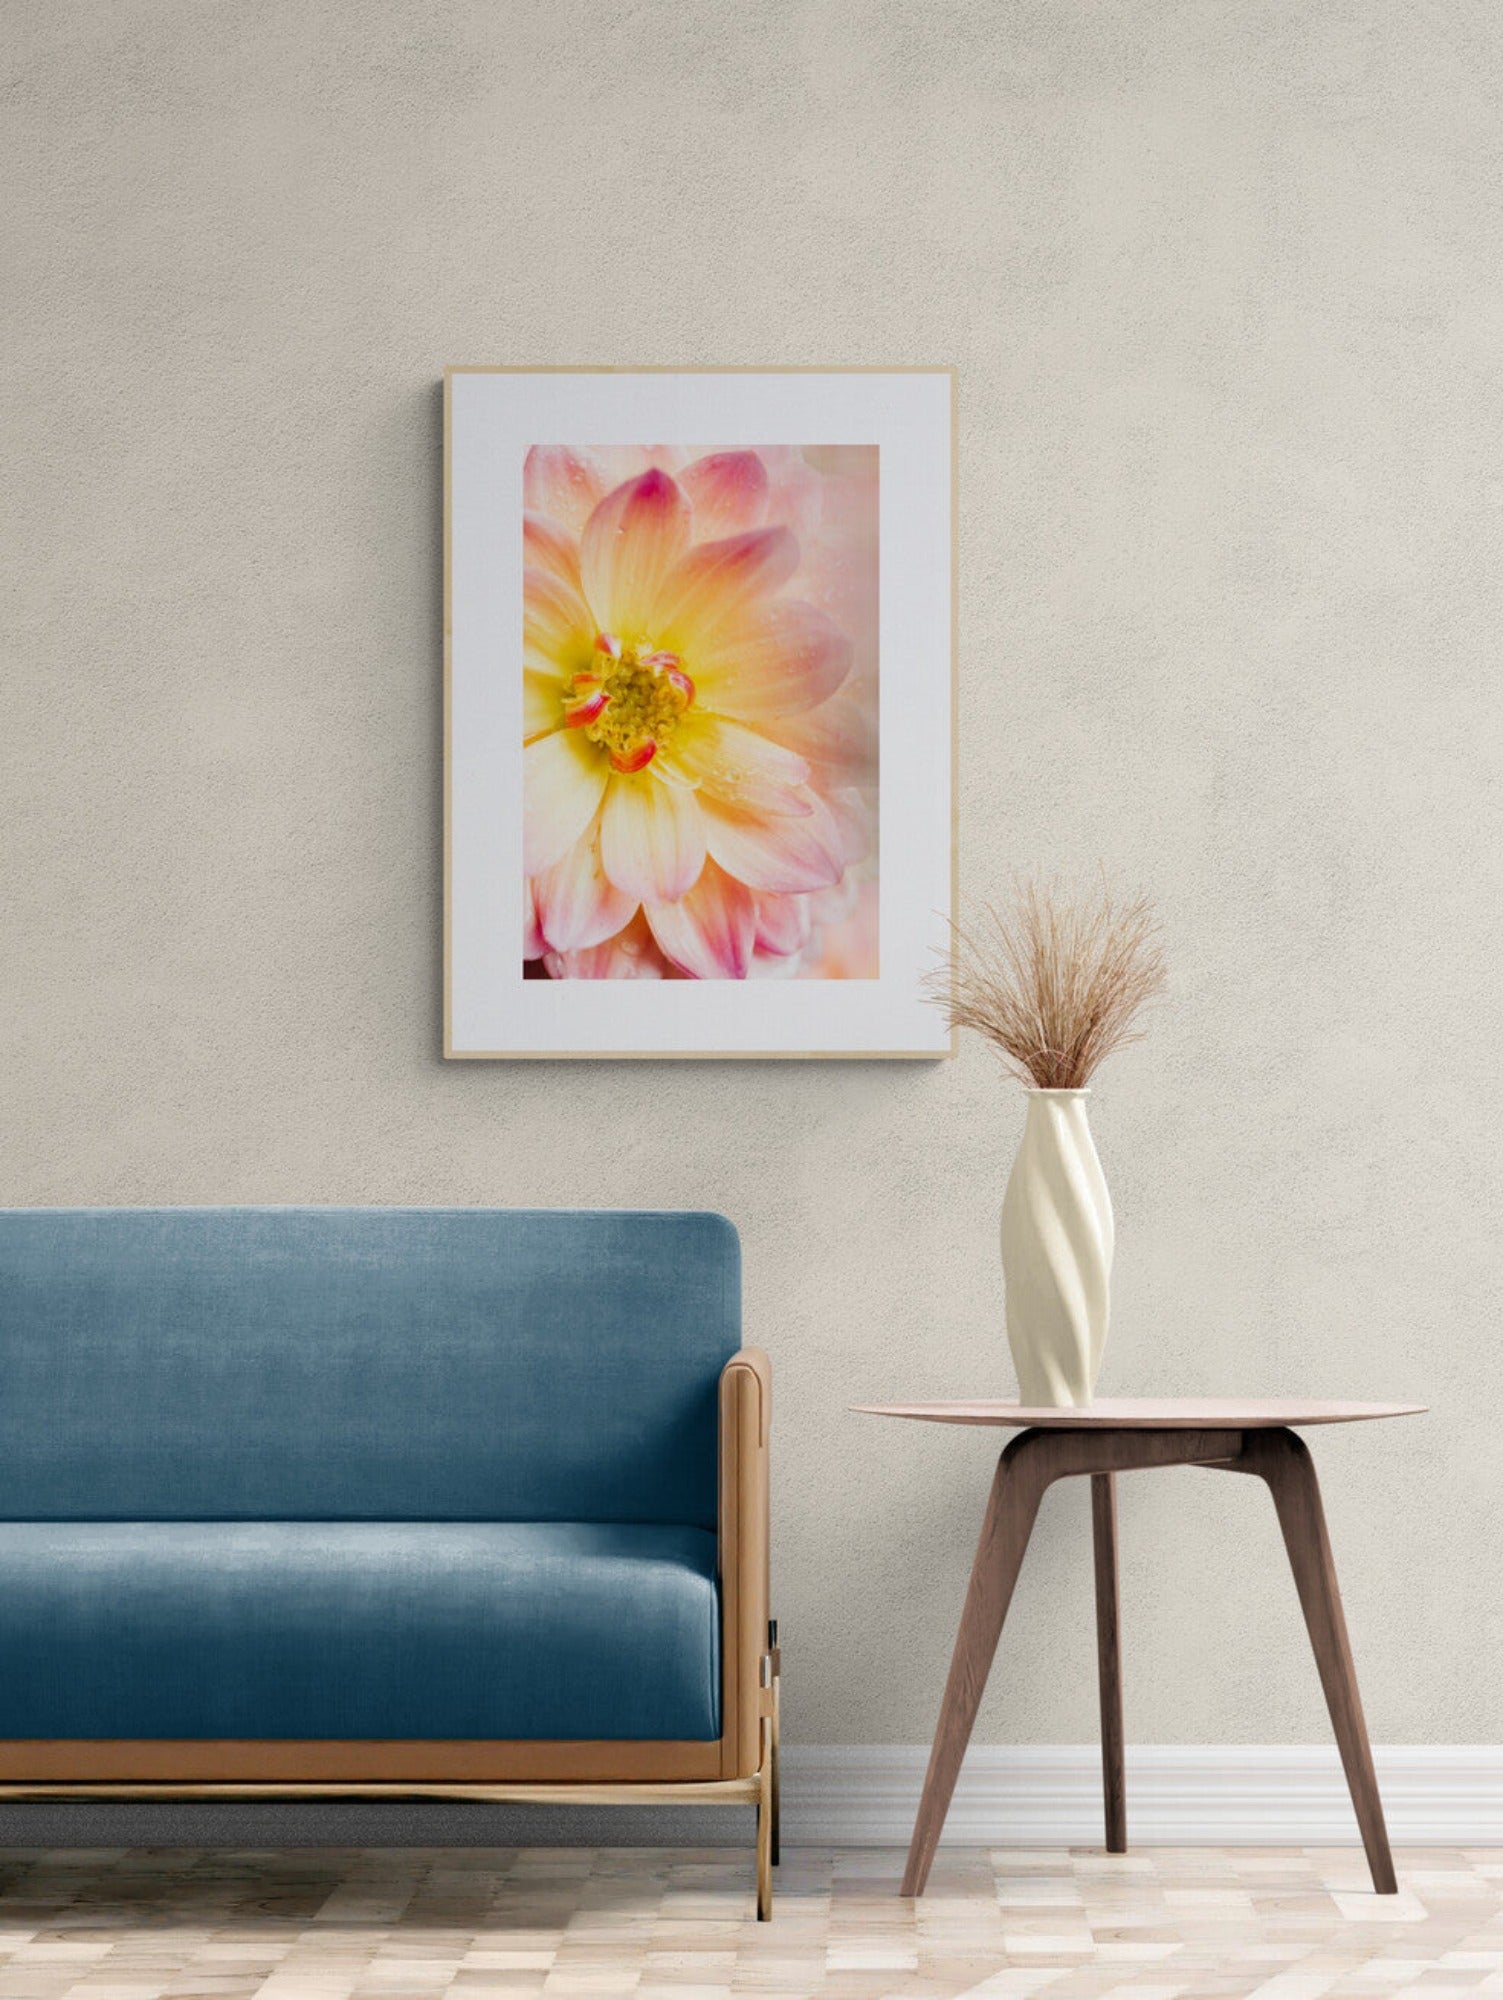 Pink and yellow dahlia photograph print displayed as wall art in a living room